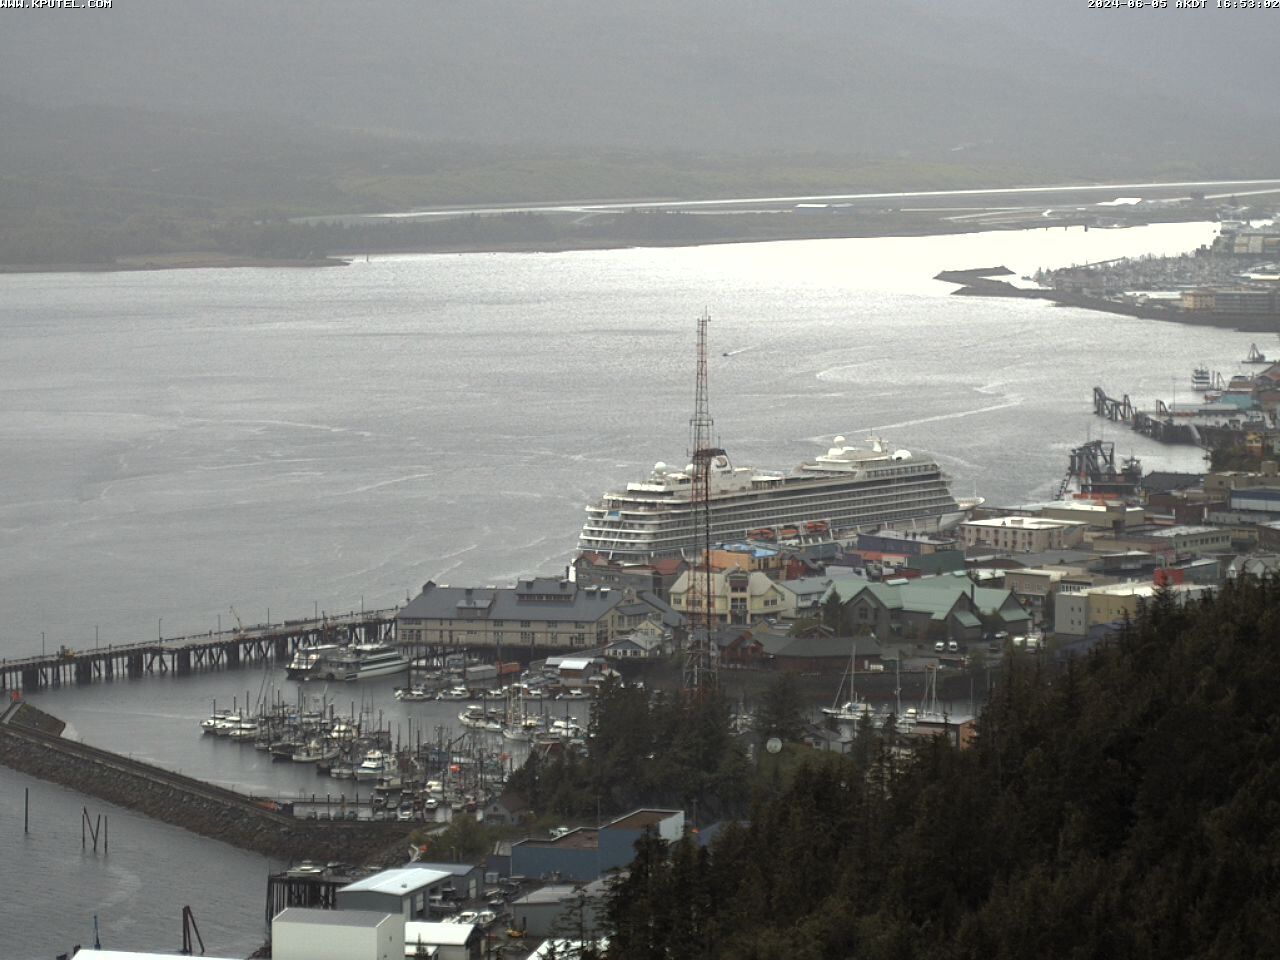 Live webcam from Thomas Basin from the Alaska Fish House